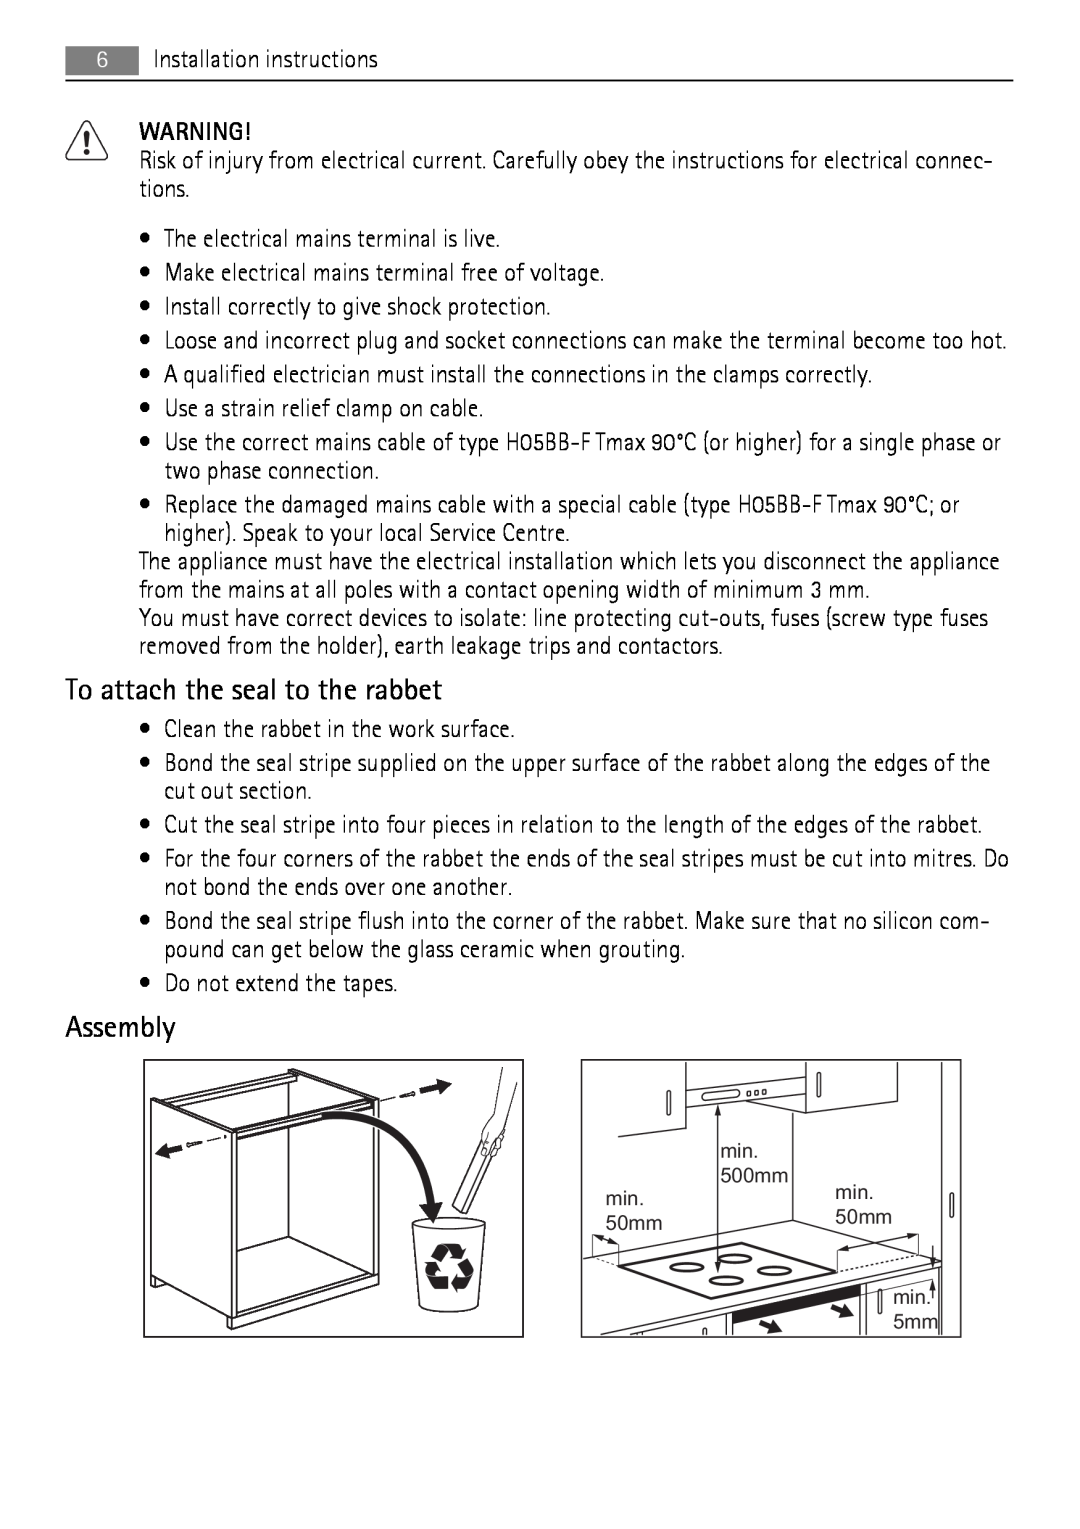 AEG HK854220IB user manual To attach the seal to the rabbet 